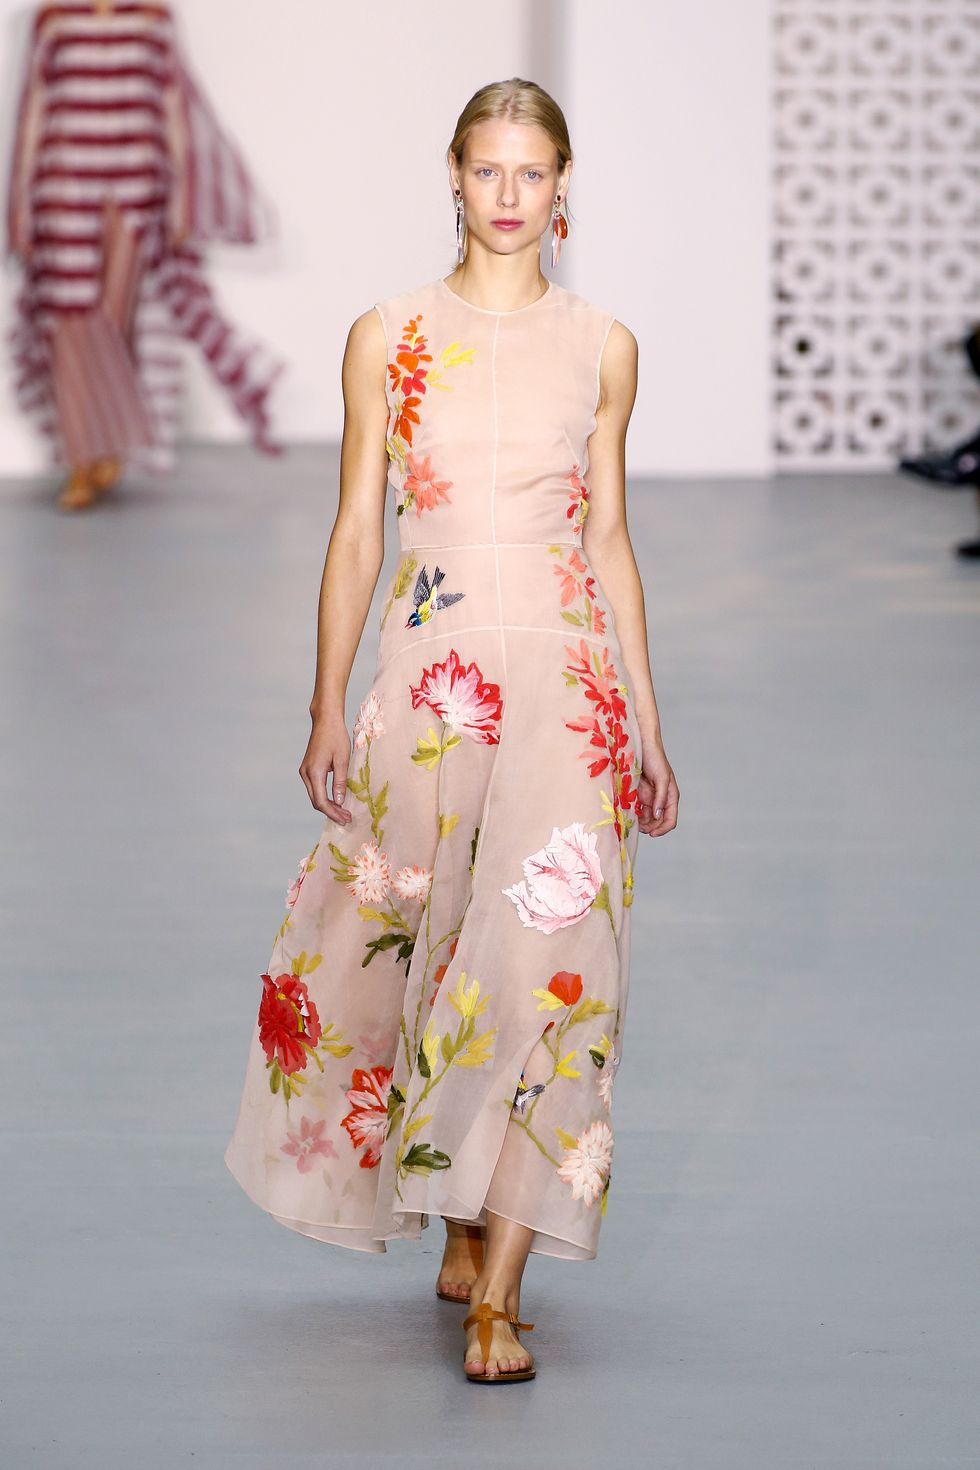 Embroidery Is Making Its Mark: From Japser Conran to Mary Katrantzou